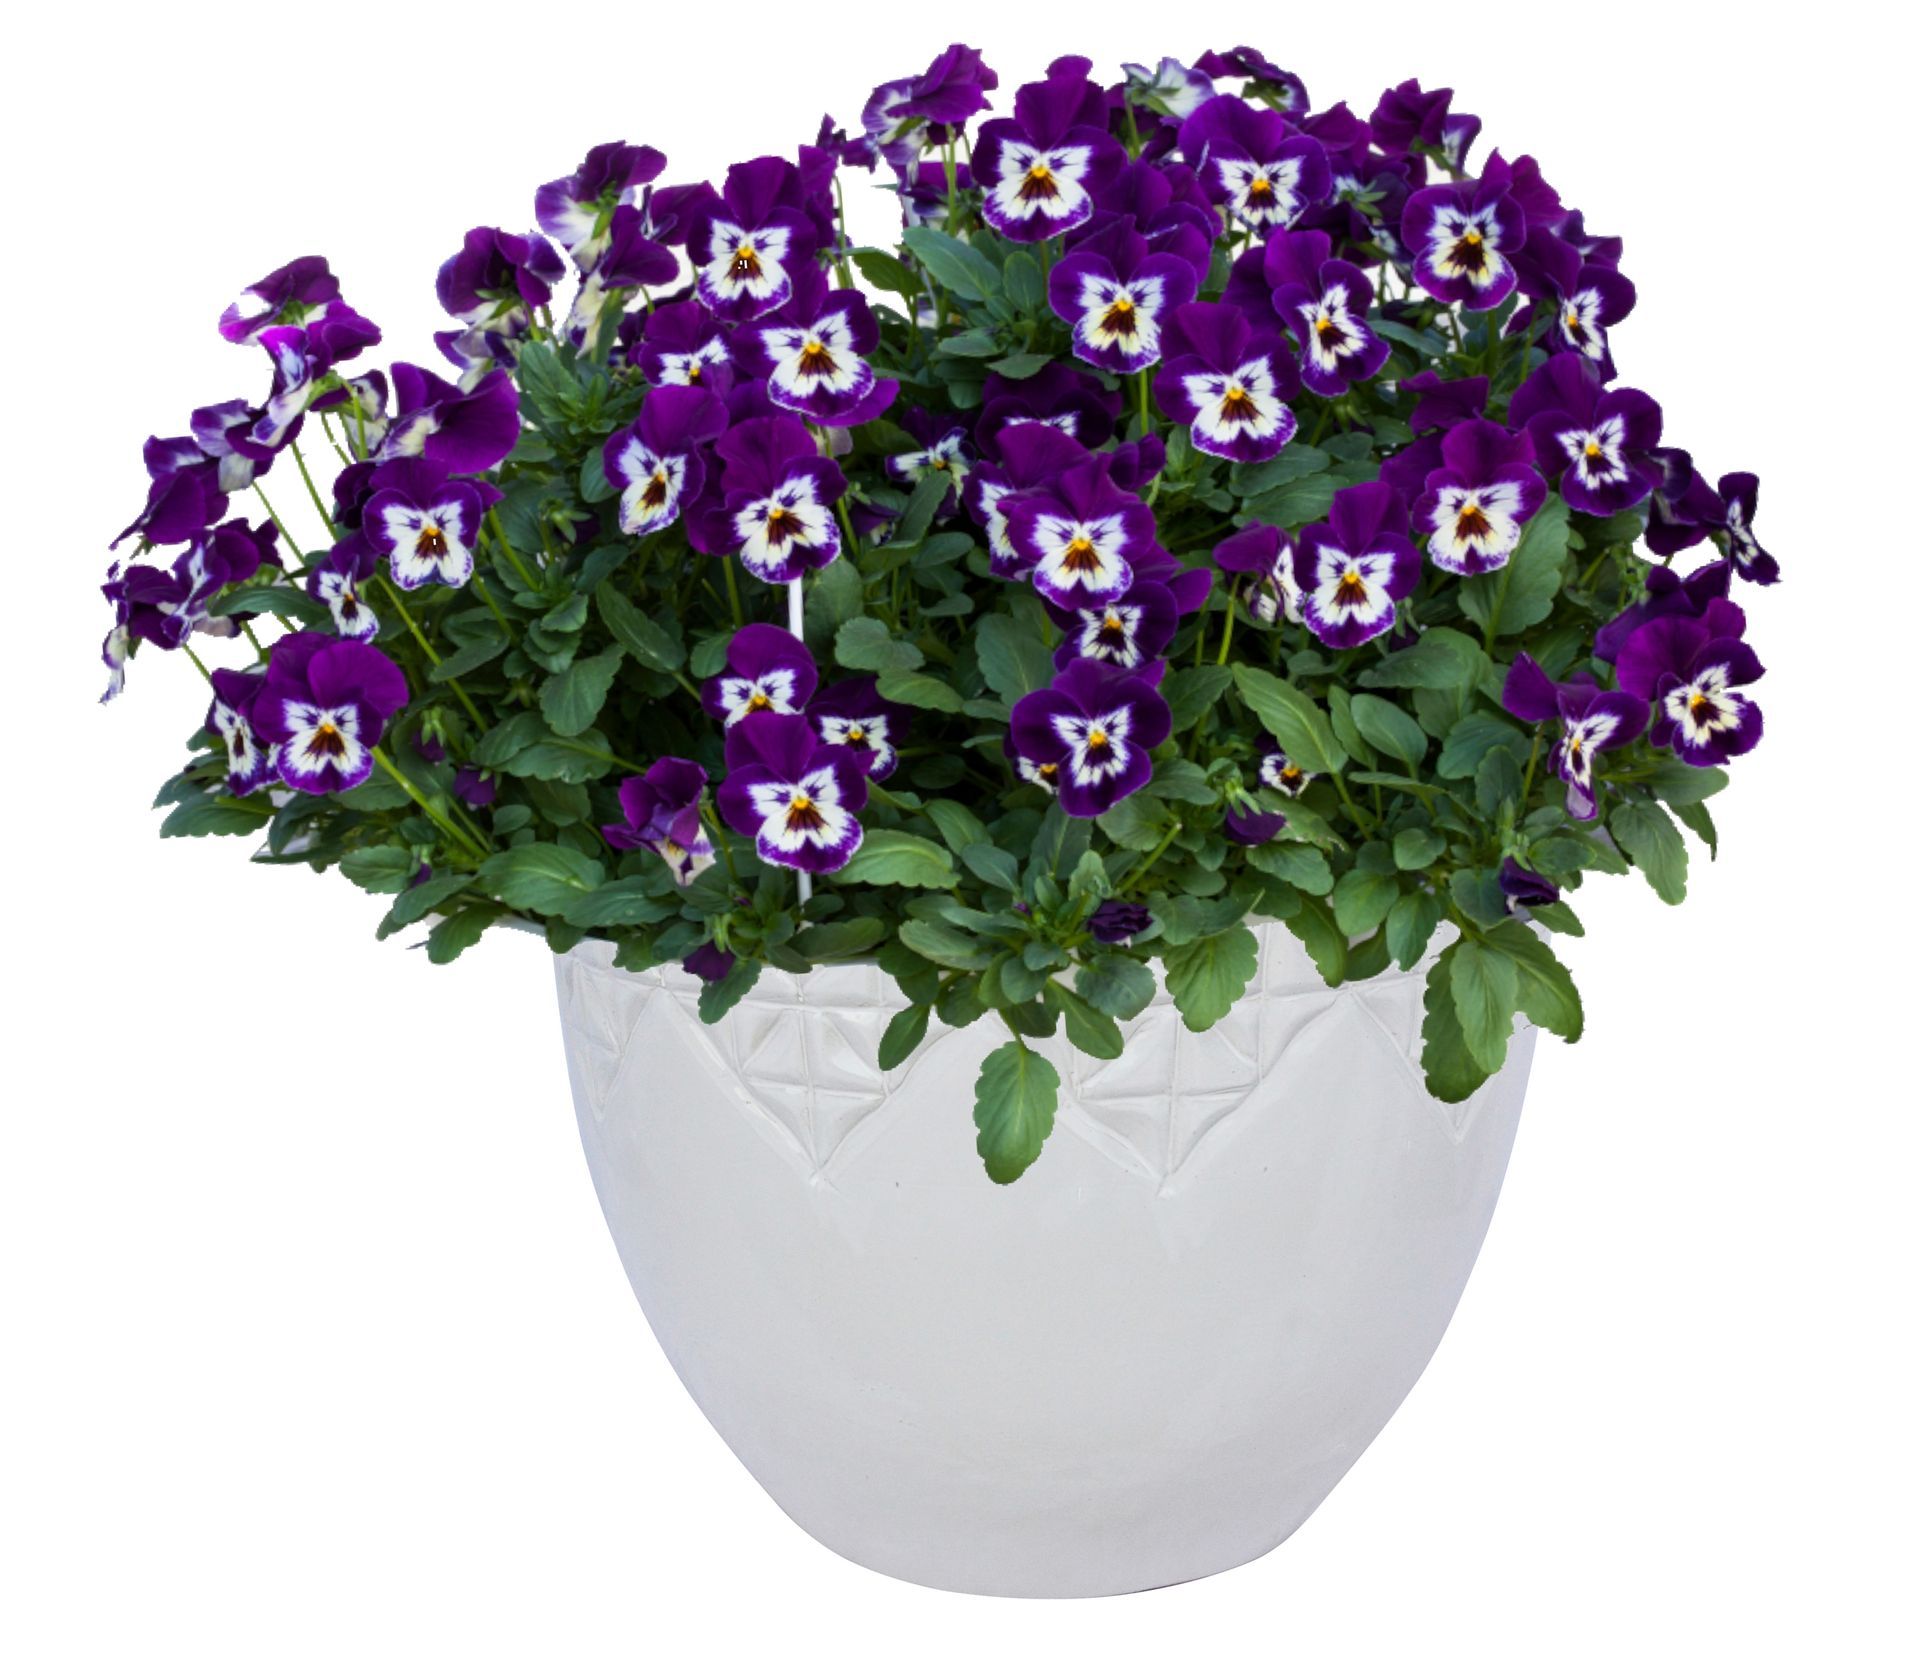 Pansy Freefall XL Purple Face Flower for sale in Lebanon PA